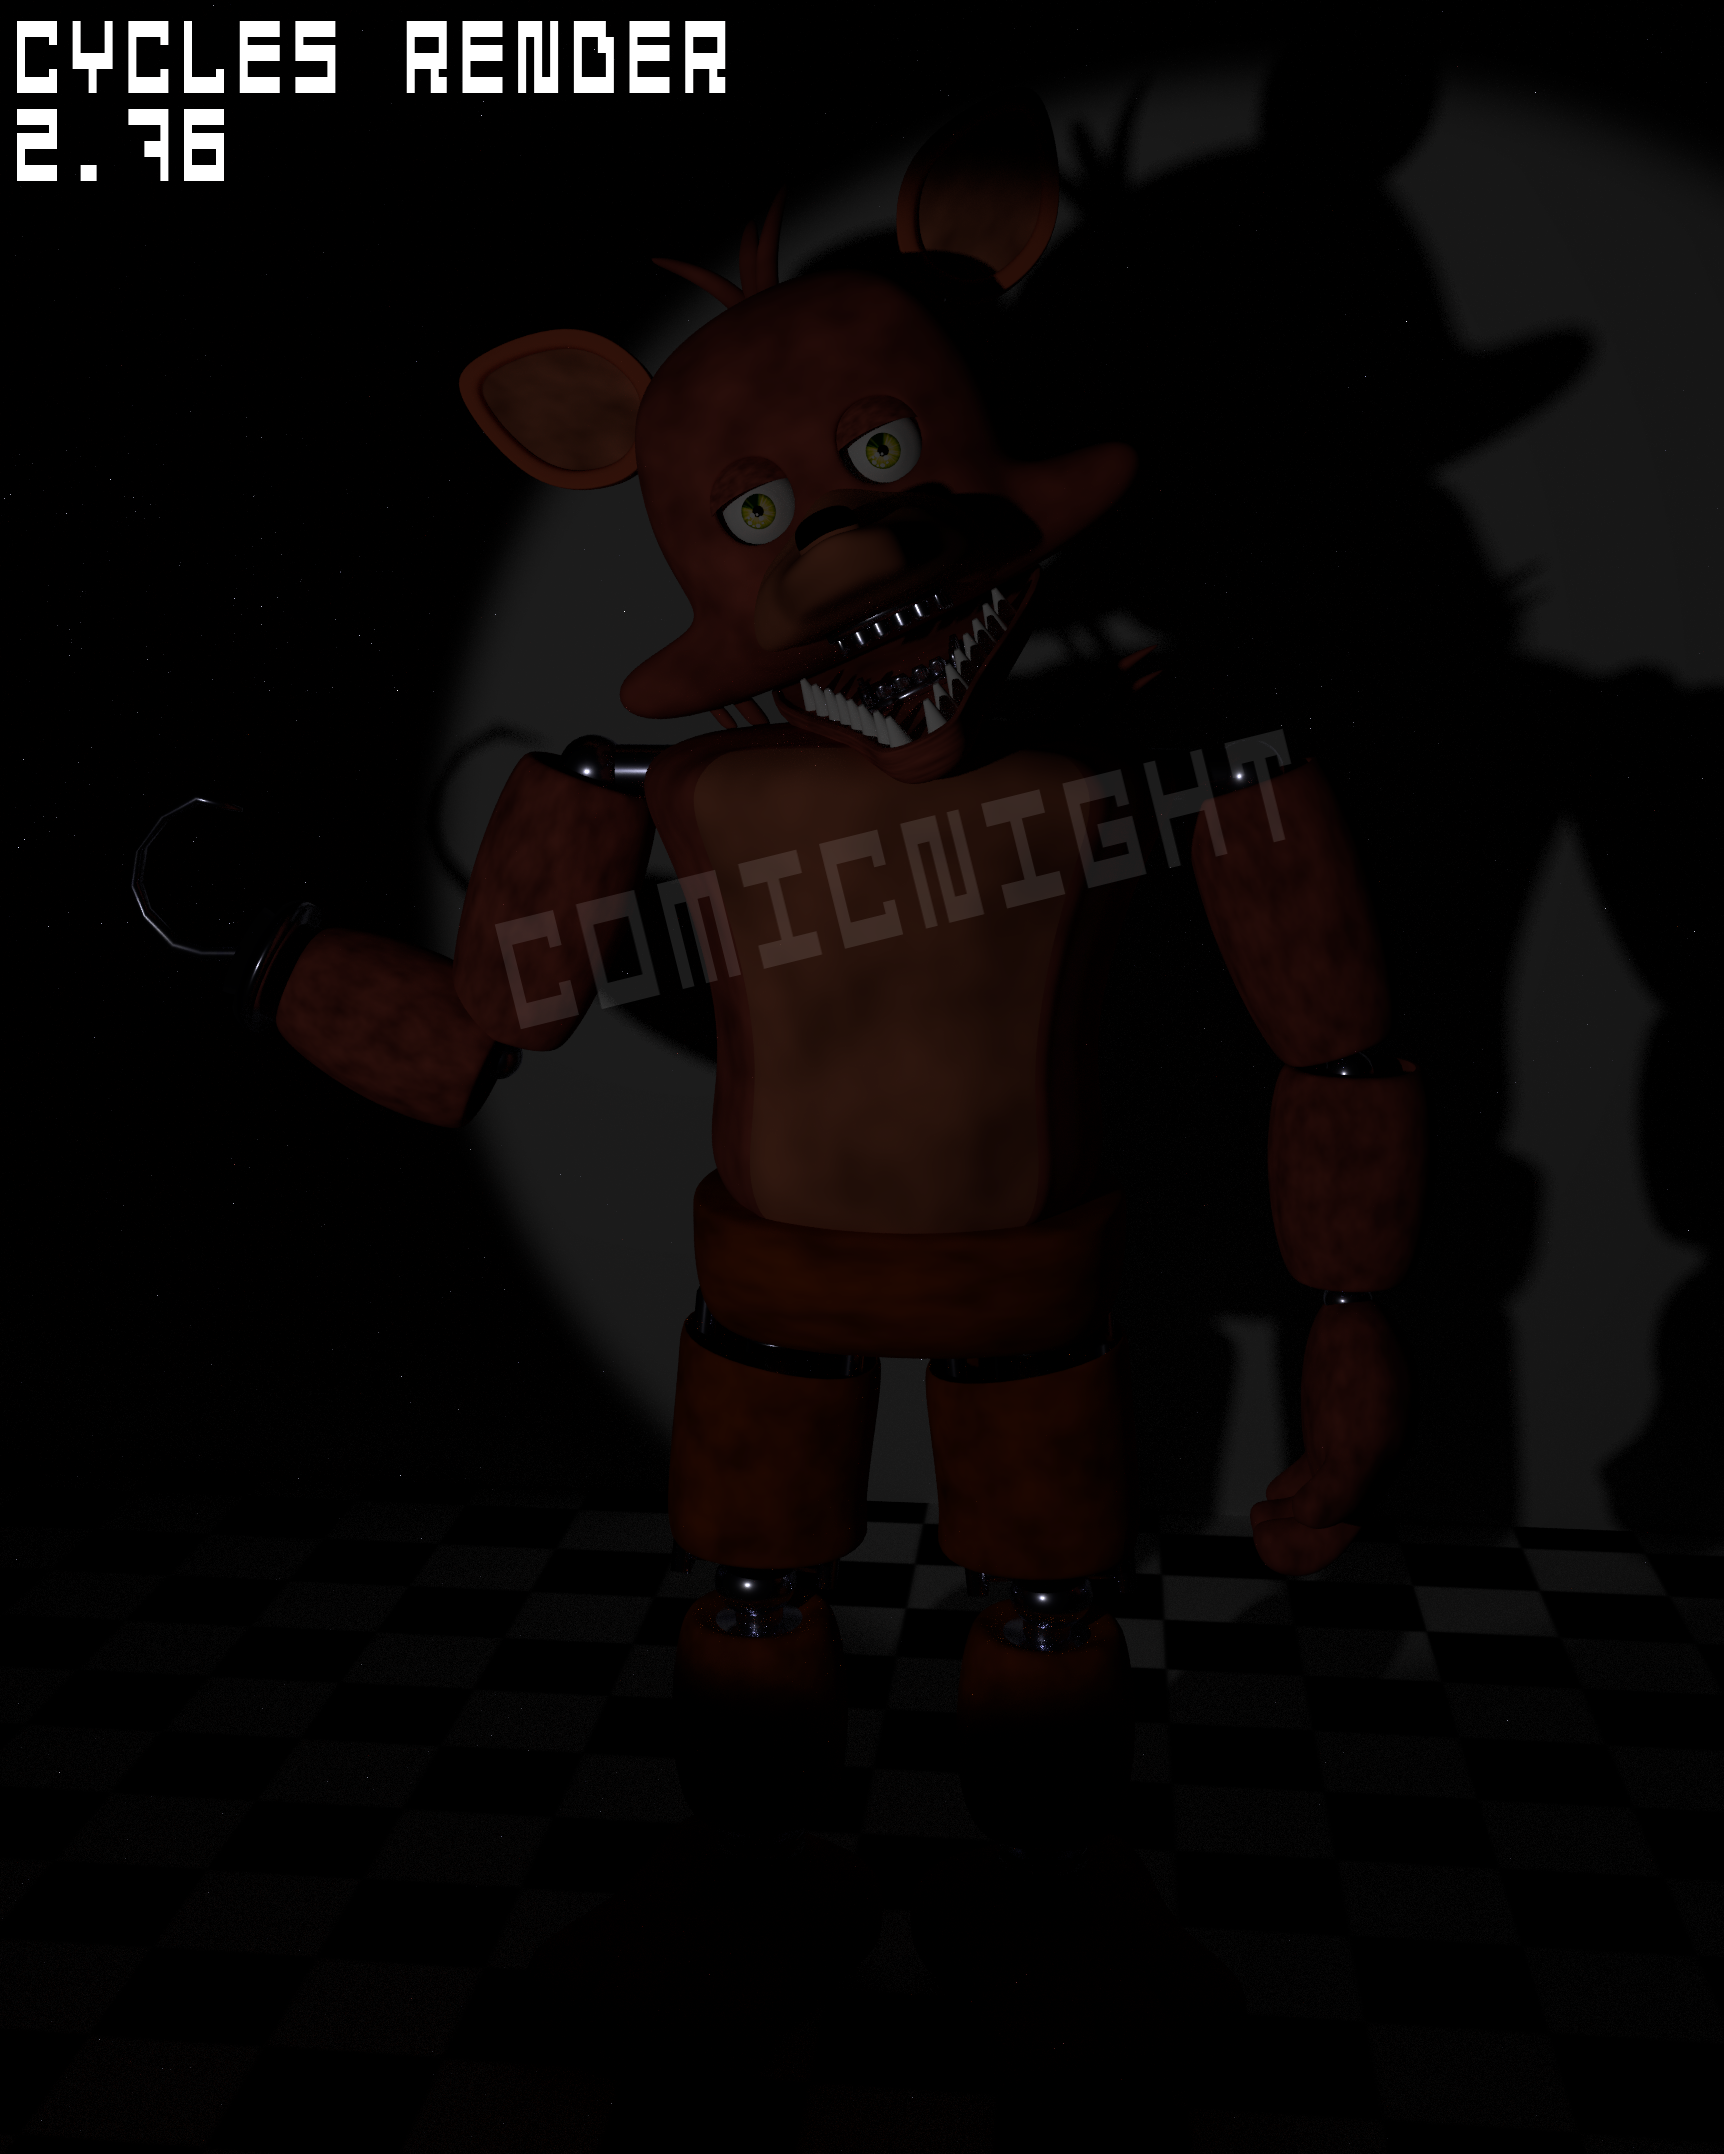 Un-Withered Foxy by DeformedFoxy on DeviantArt